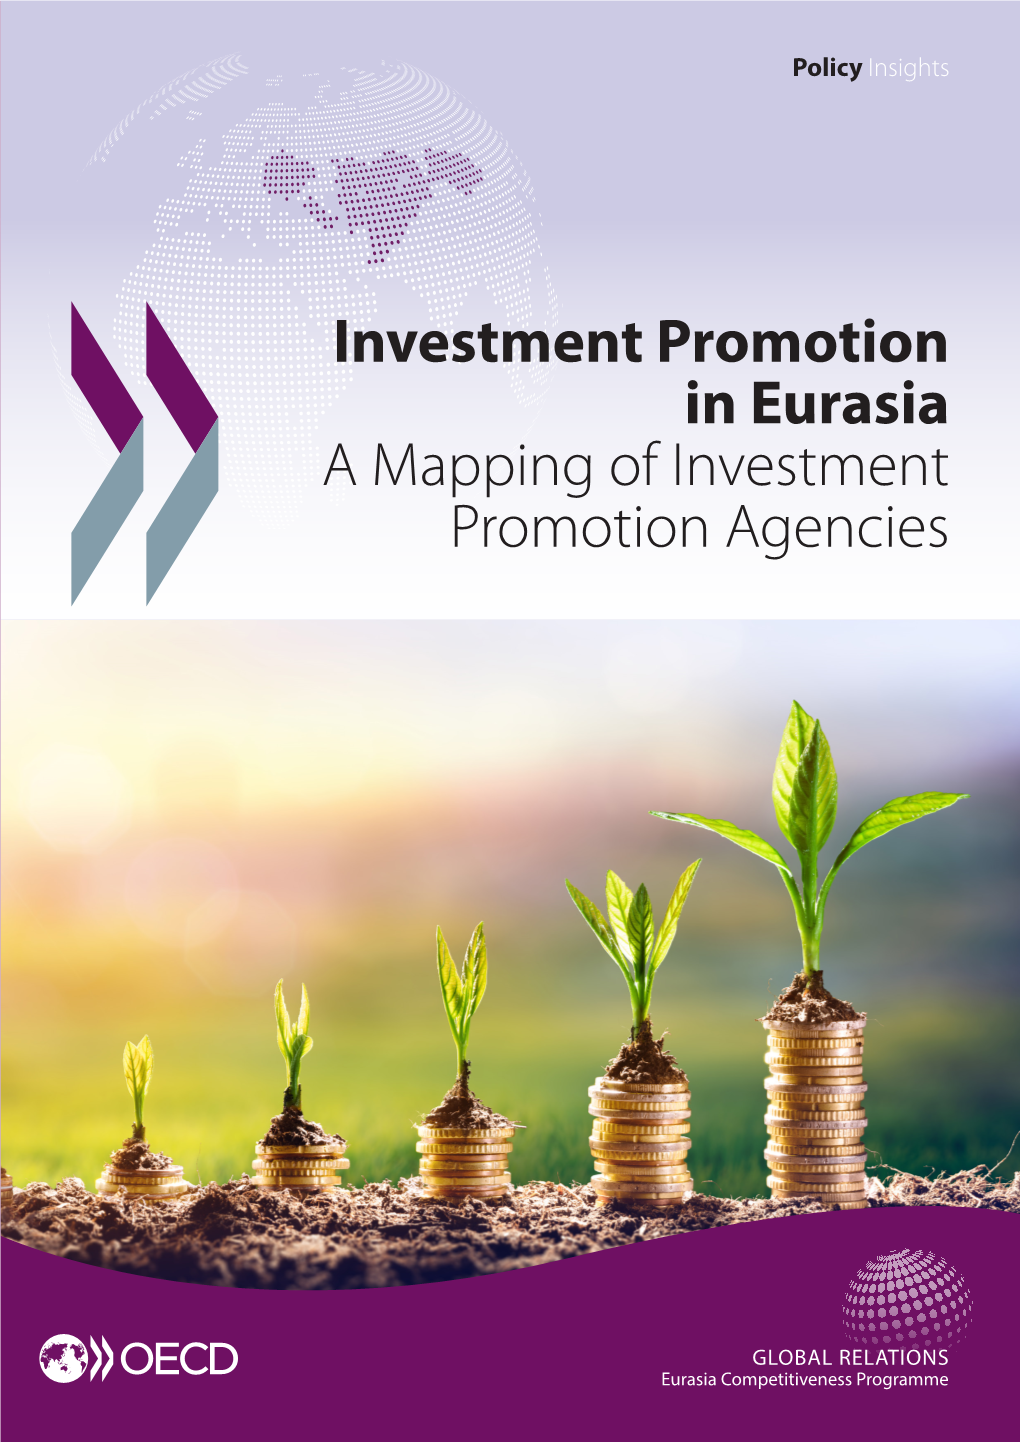 A Mapping of Investment Promotion Agencies